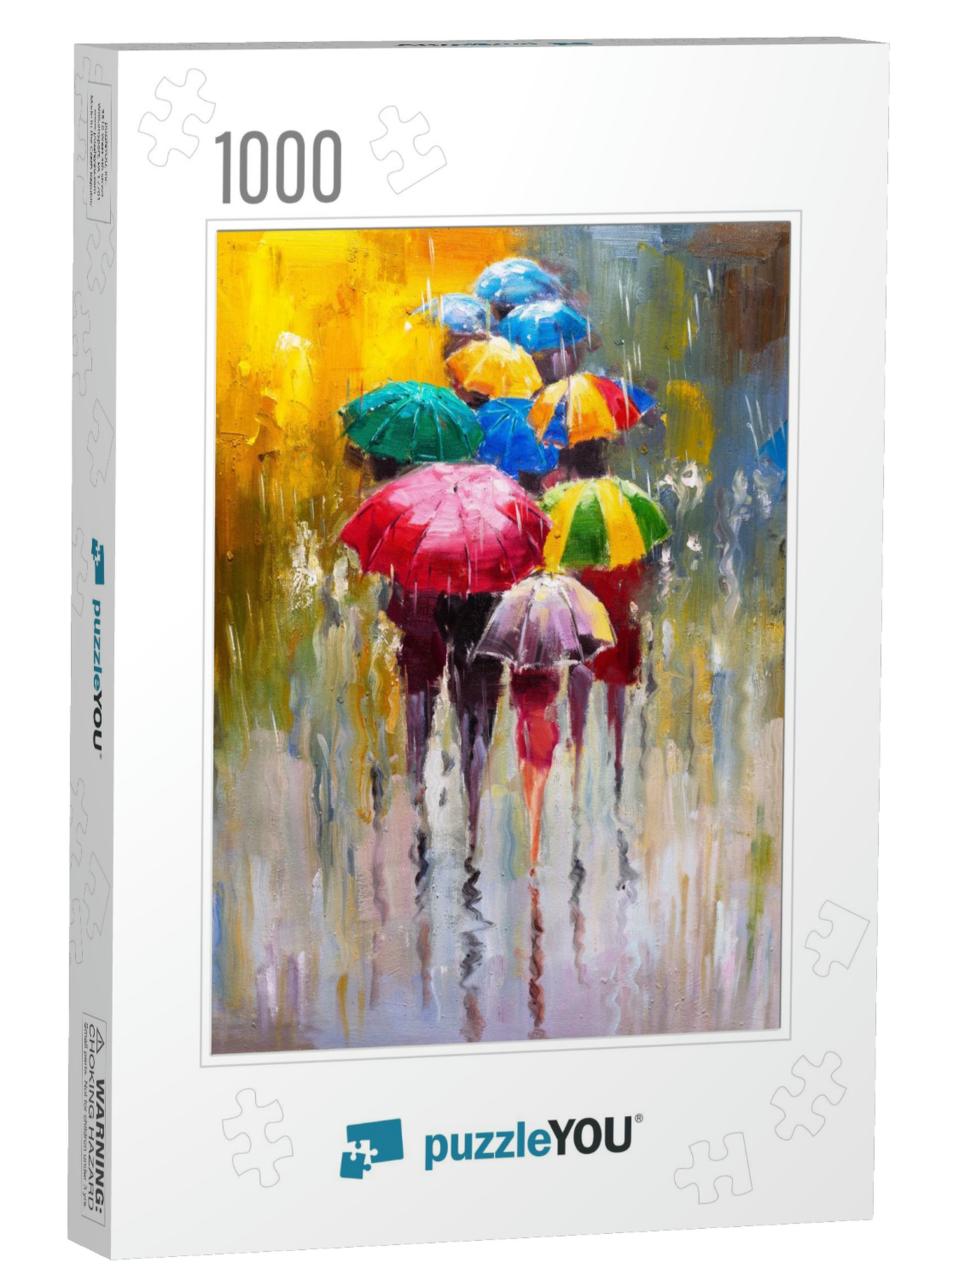 Oil Painting - Rainy Day... Jigsaw Puzzle with 1000 pieces